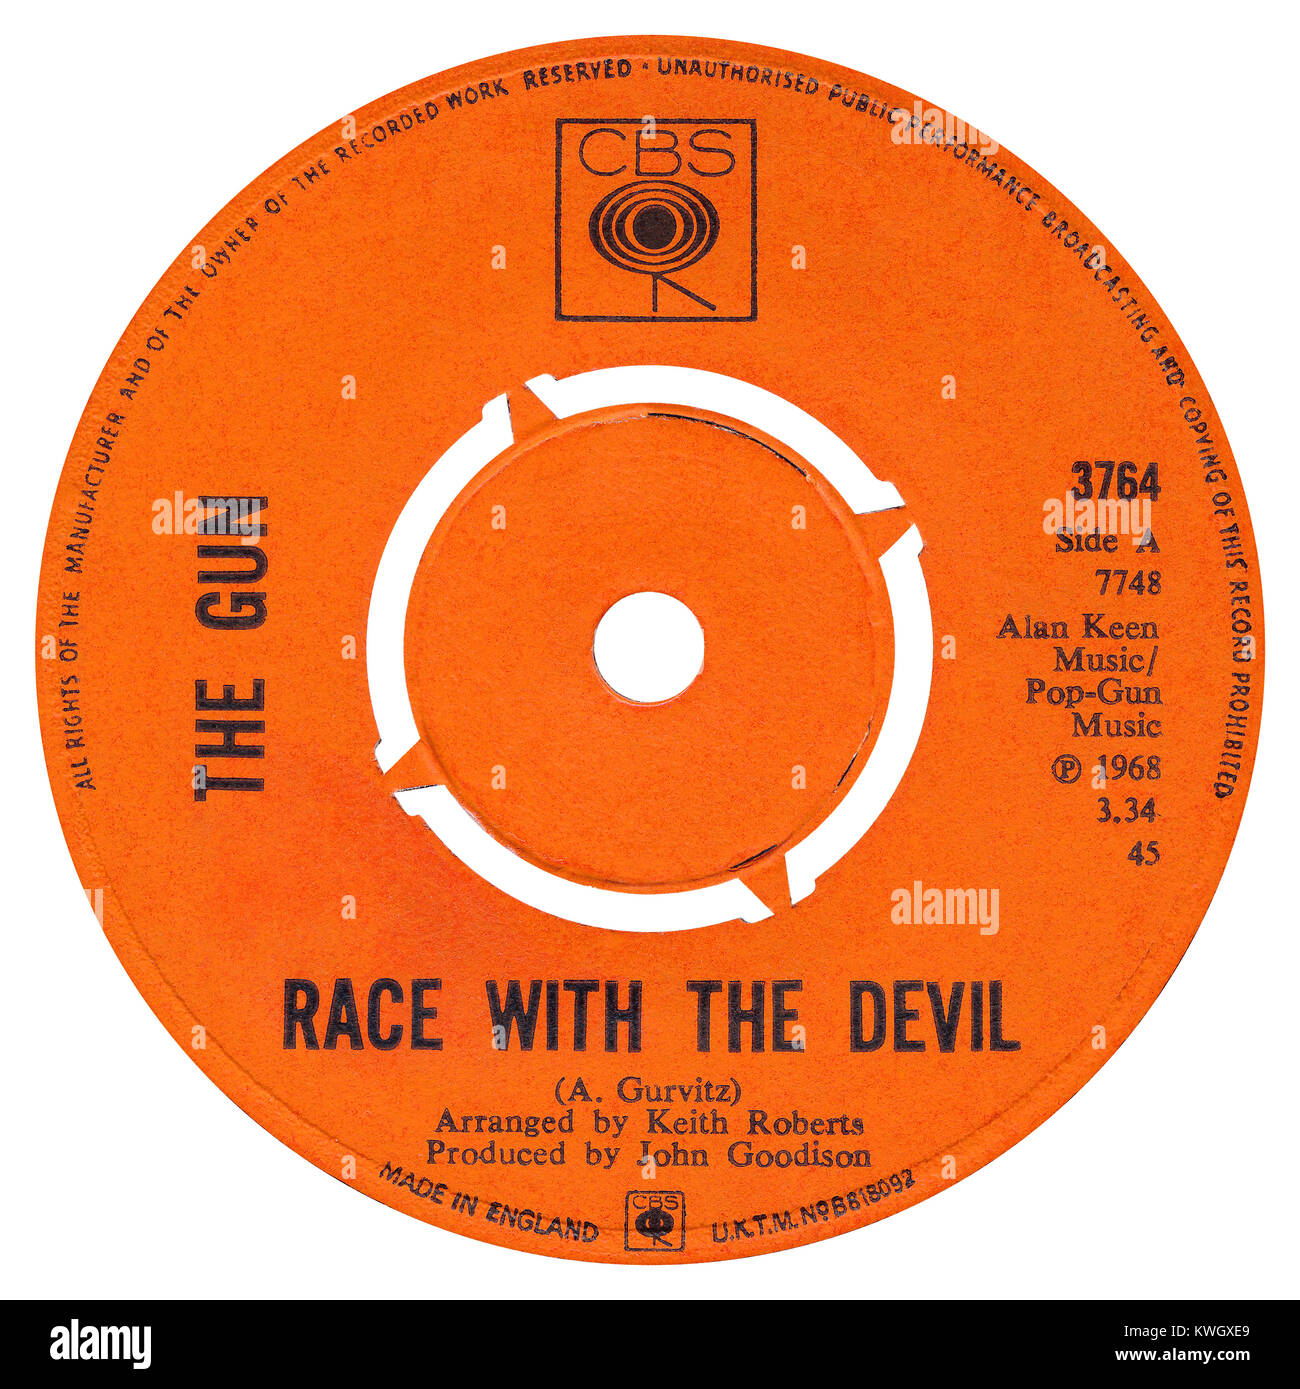 45 RPM 7' UK record label of Race With The Devil by The Gun. Written by Adrian Gurvitz, arranged by Keith Roberts and produced by John Goodison. Released on the CBS label in October 1968. Stock Photo